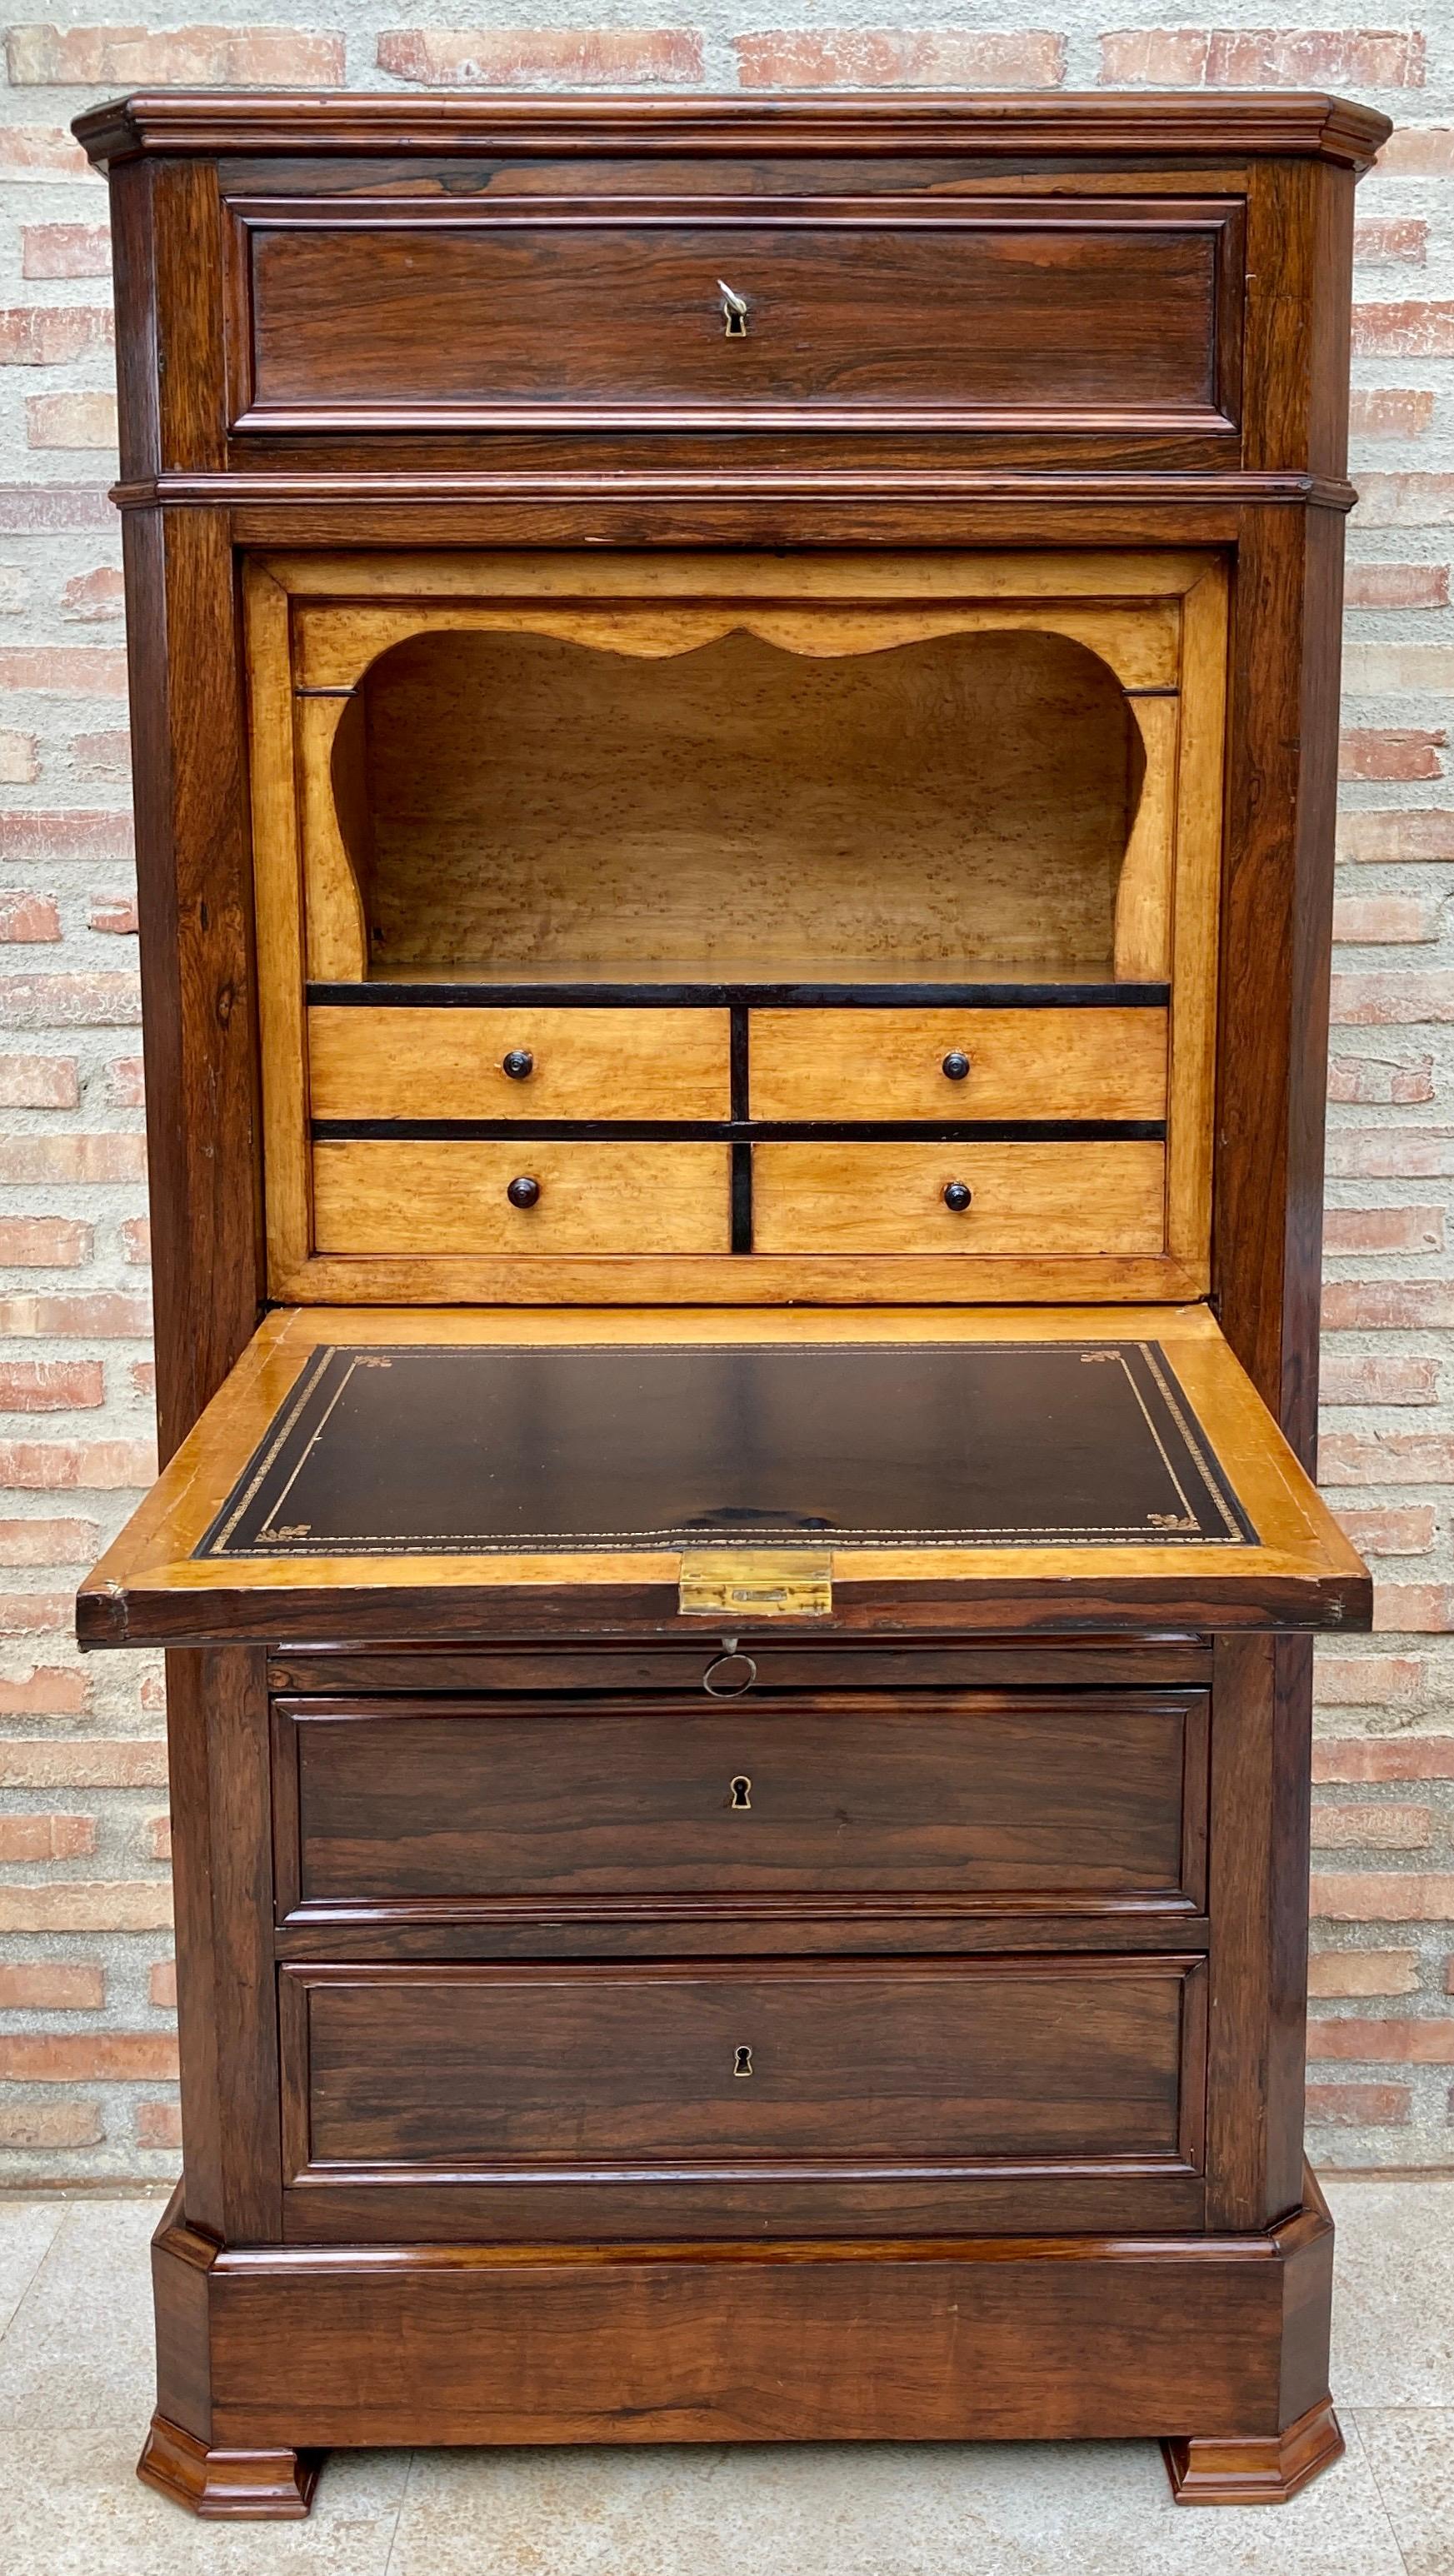 Beautiful walnut secretary from the 19th century, it has a top drawer with a key, it also has a central folding door that hides three drawers (2 small and one larger) when opened, and a leather-upholstered desk. It is newly restored and cured